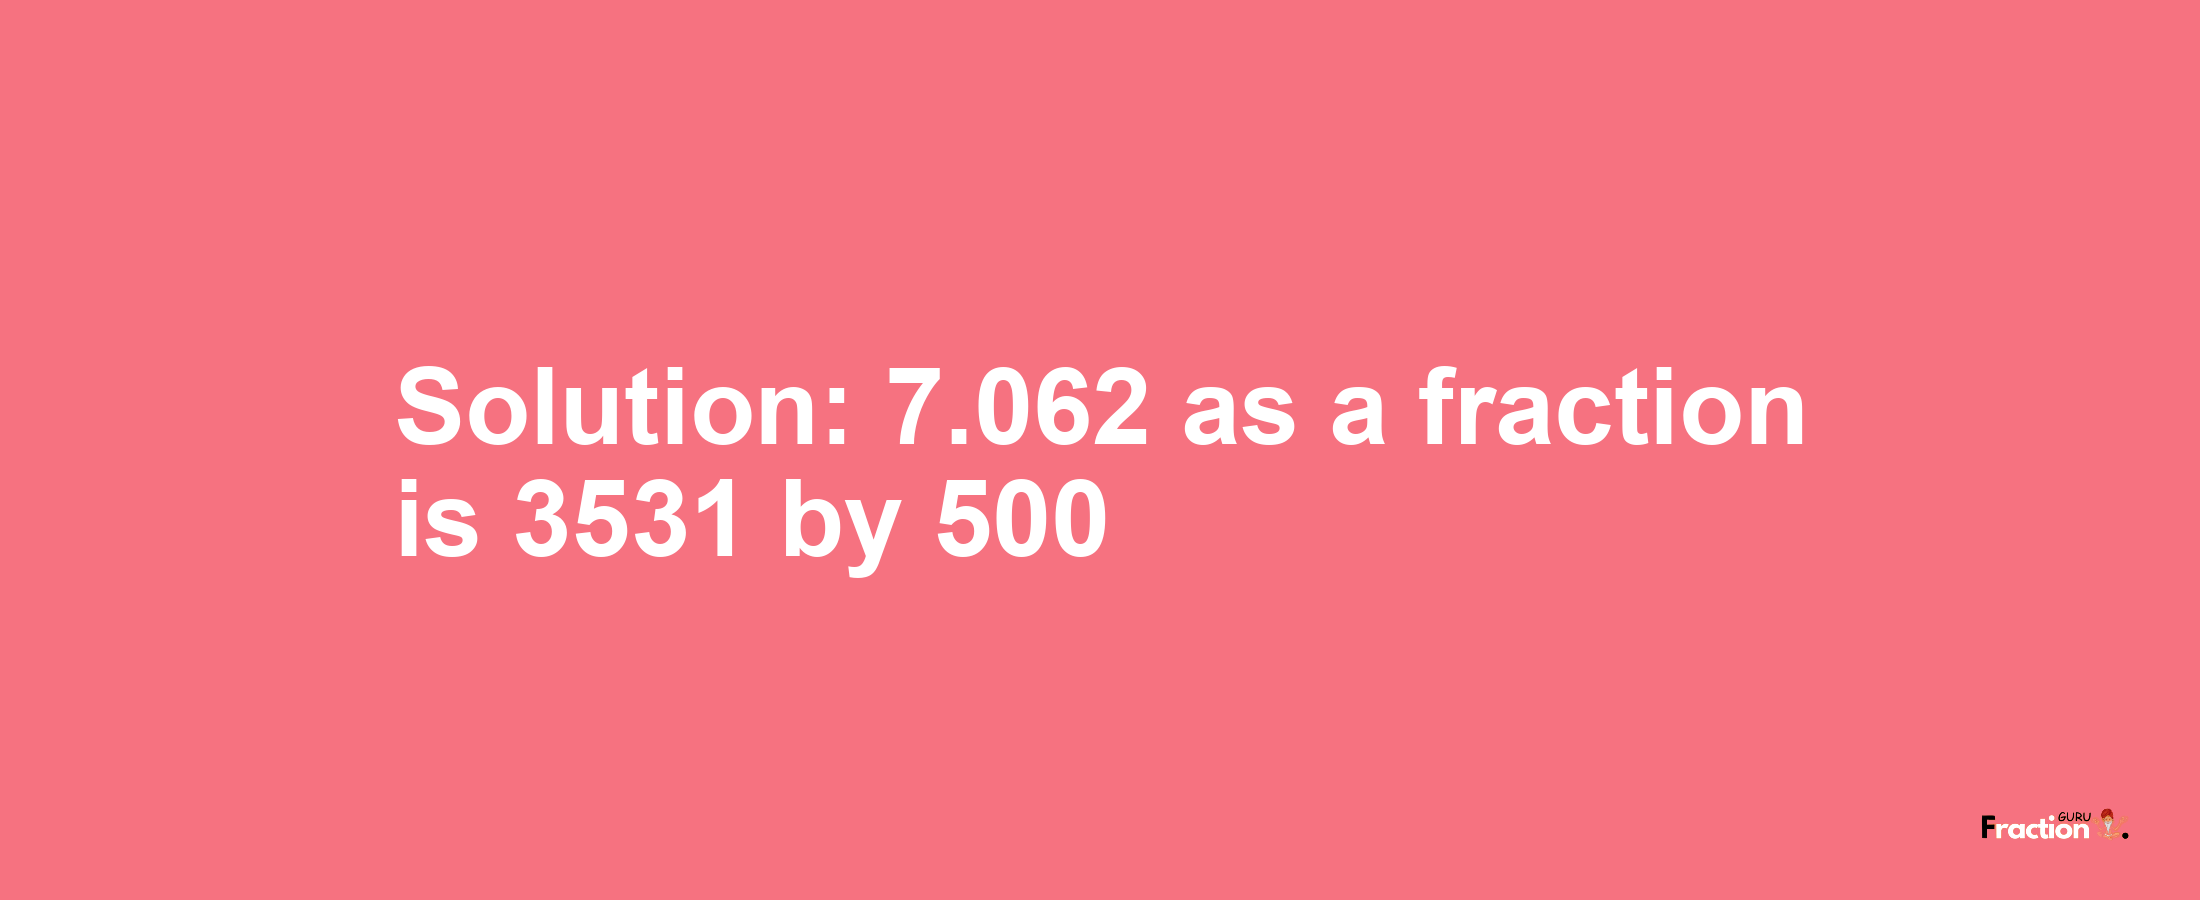 Solution:7.062 as a fraction is 3531/500